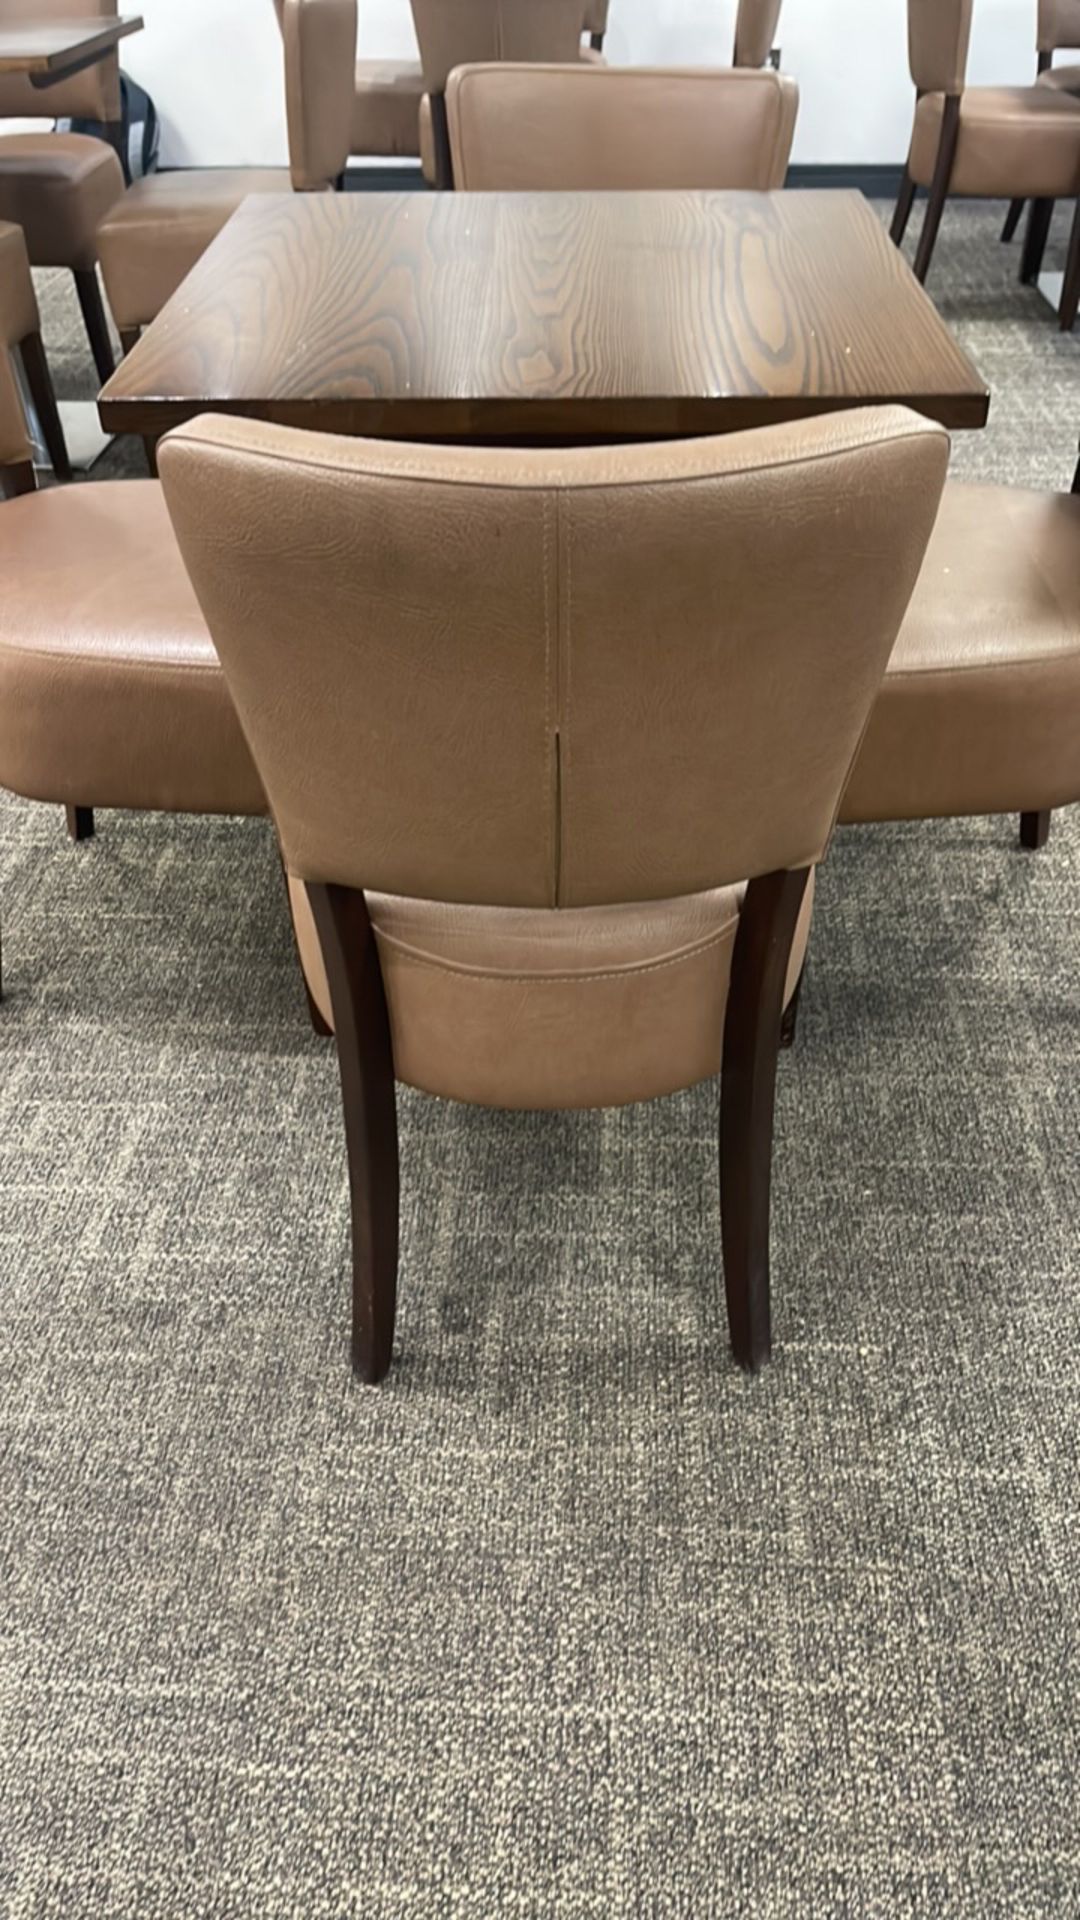 4 x Brown Leather Chairs and 1 x Square Table - Image 2 of 6